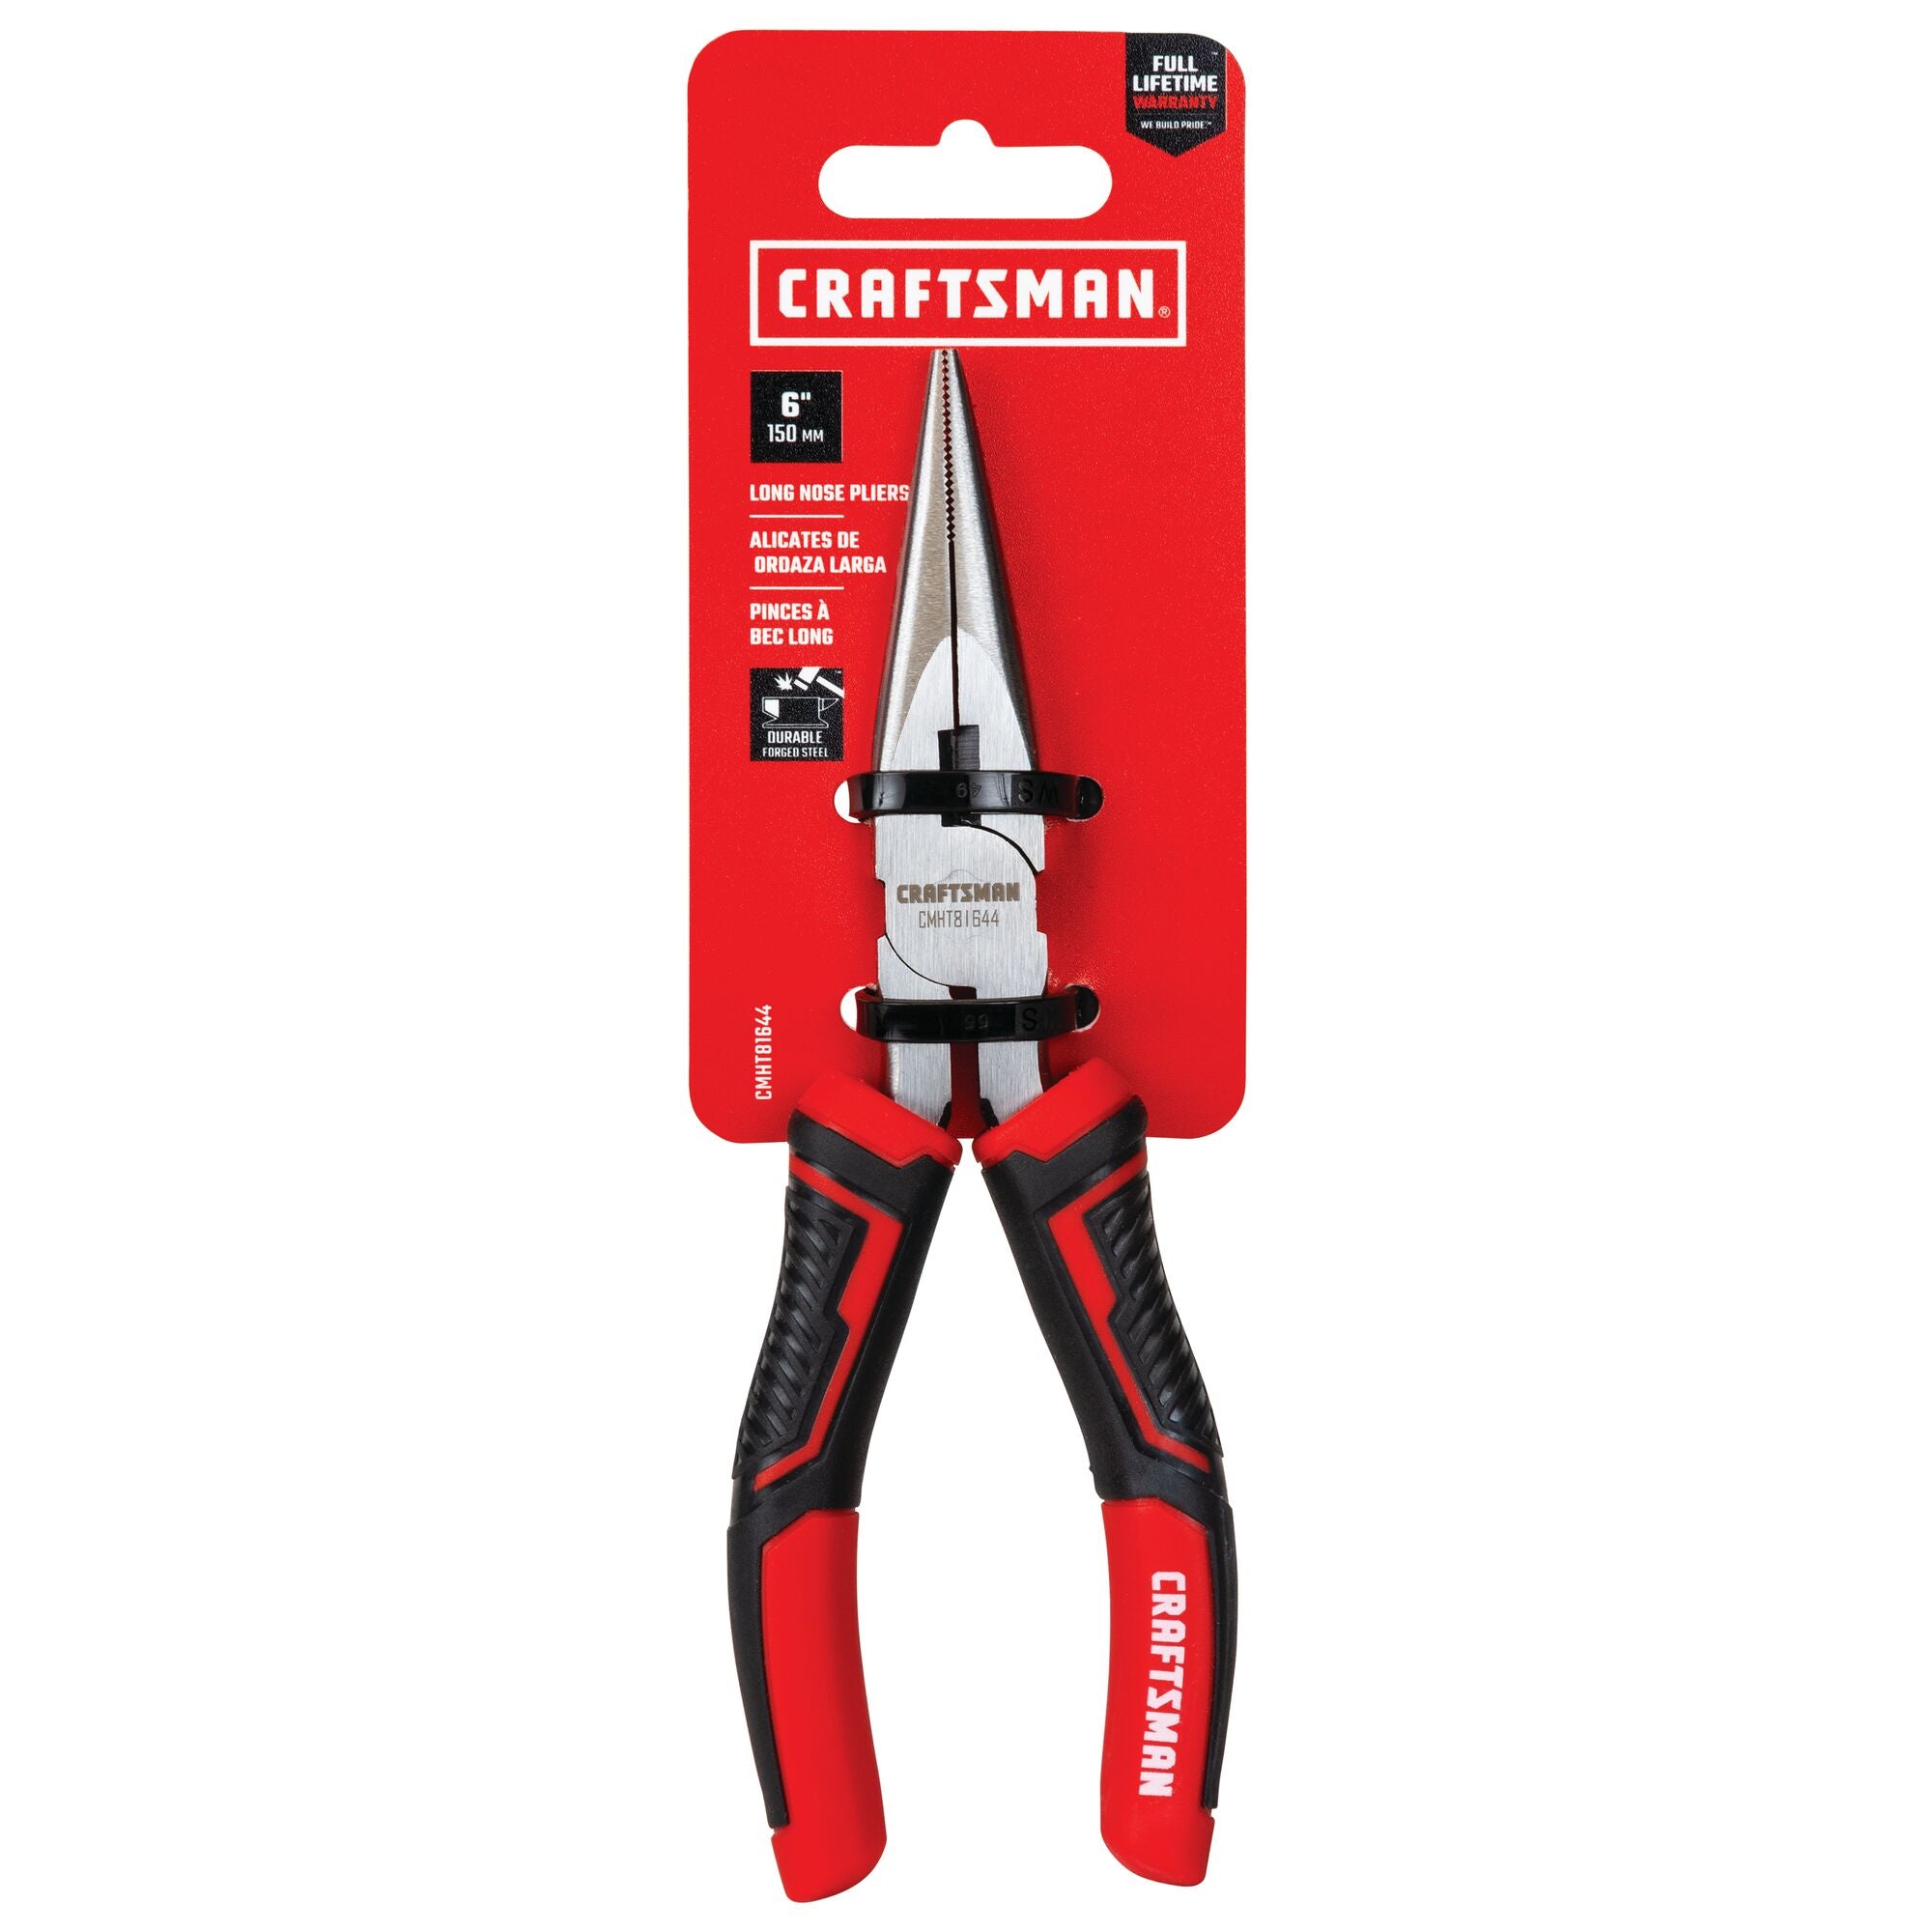 6-in Long Nose Pliers | CRAFTSMAN